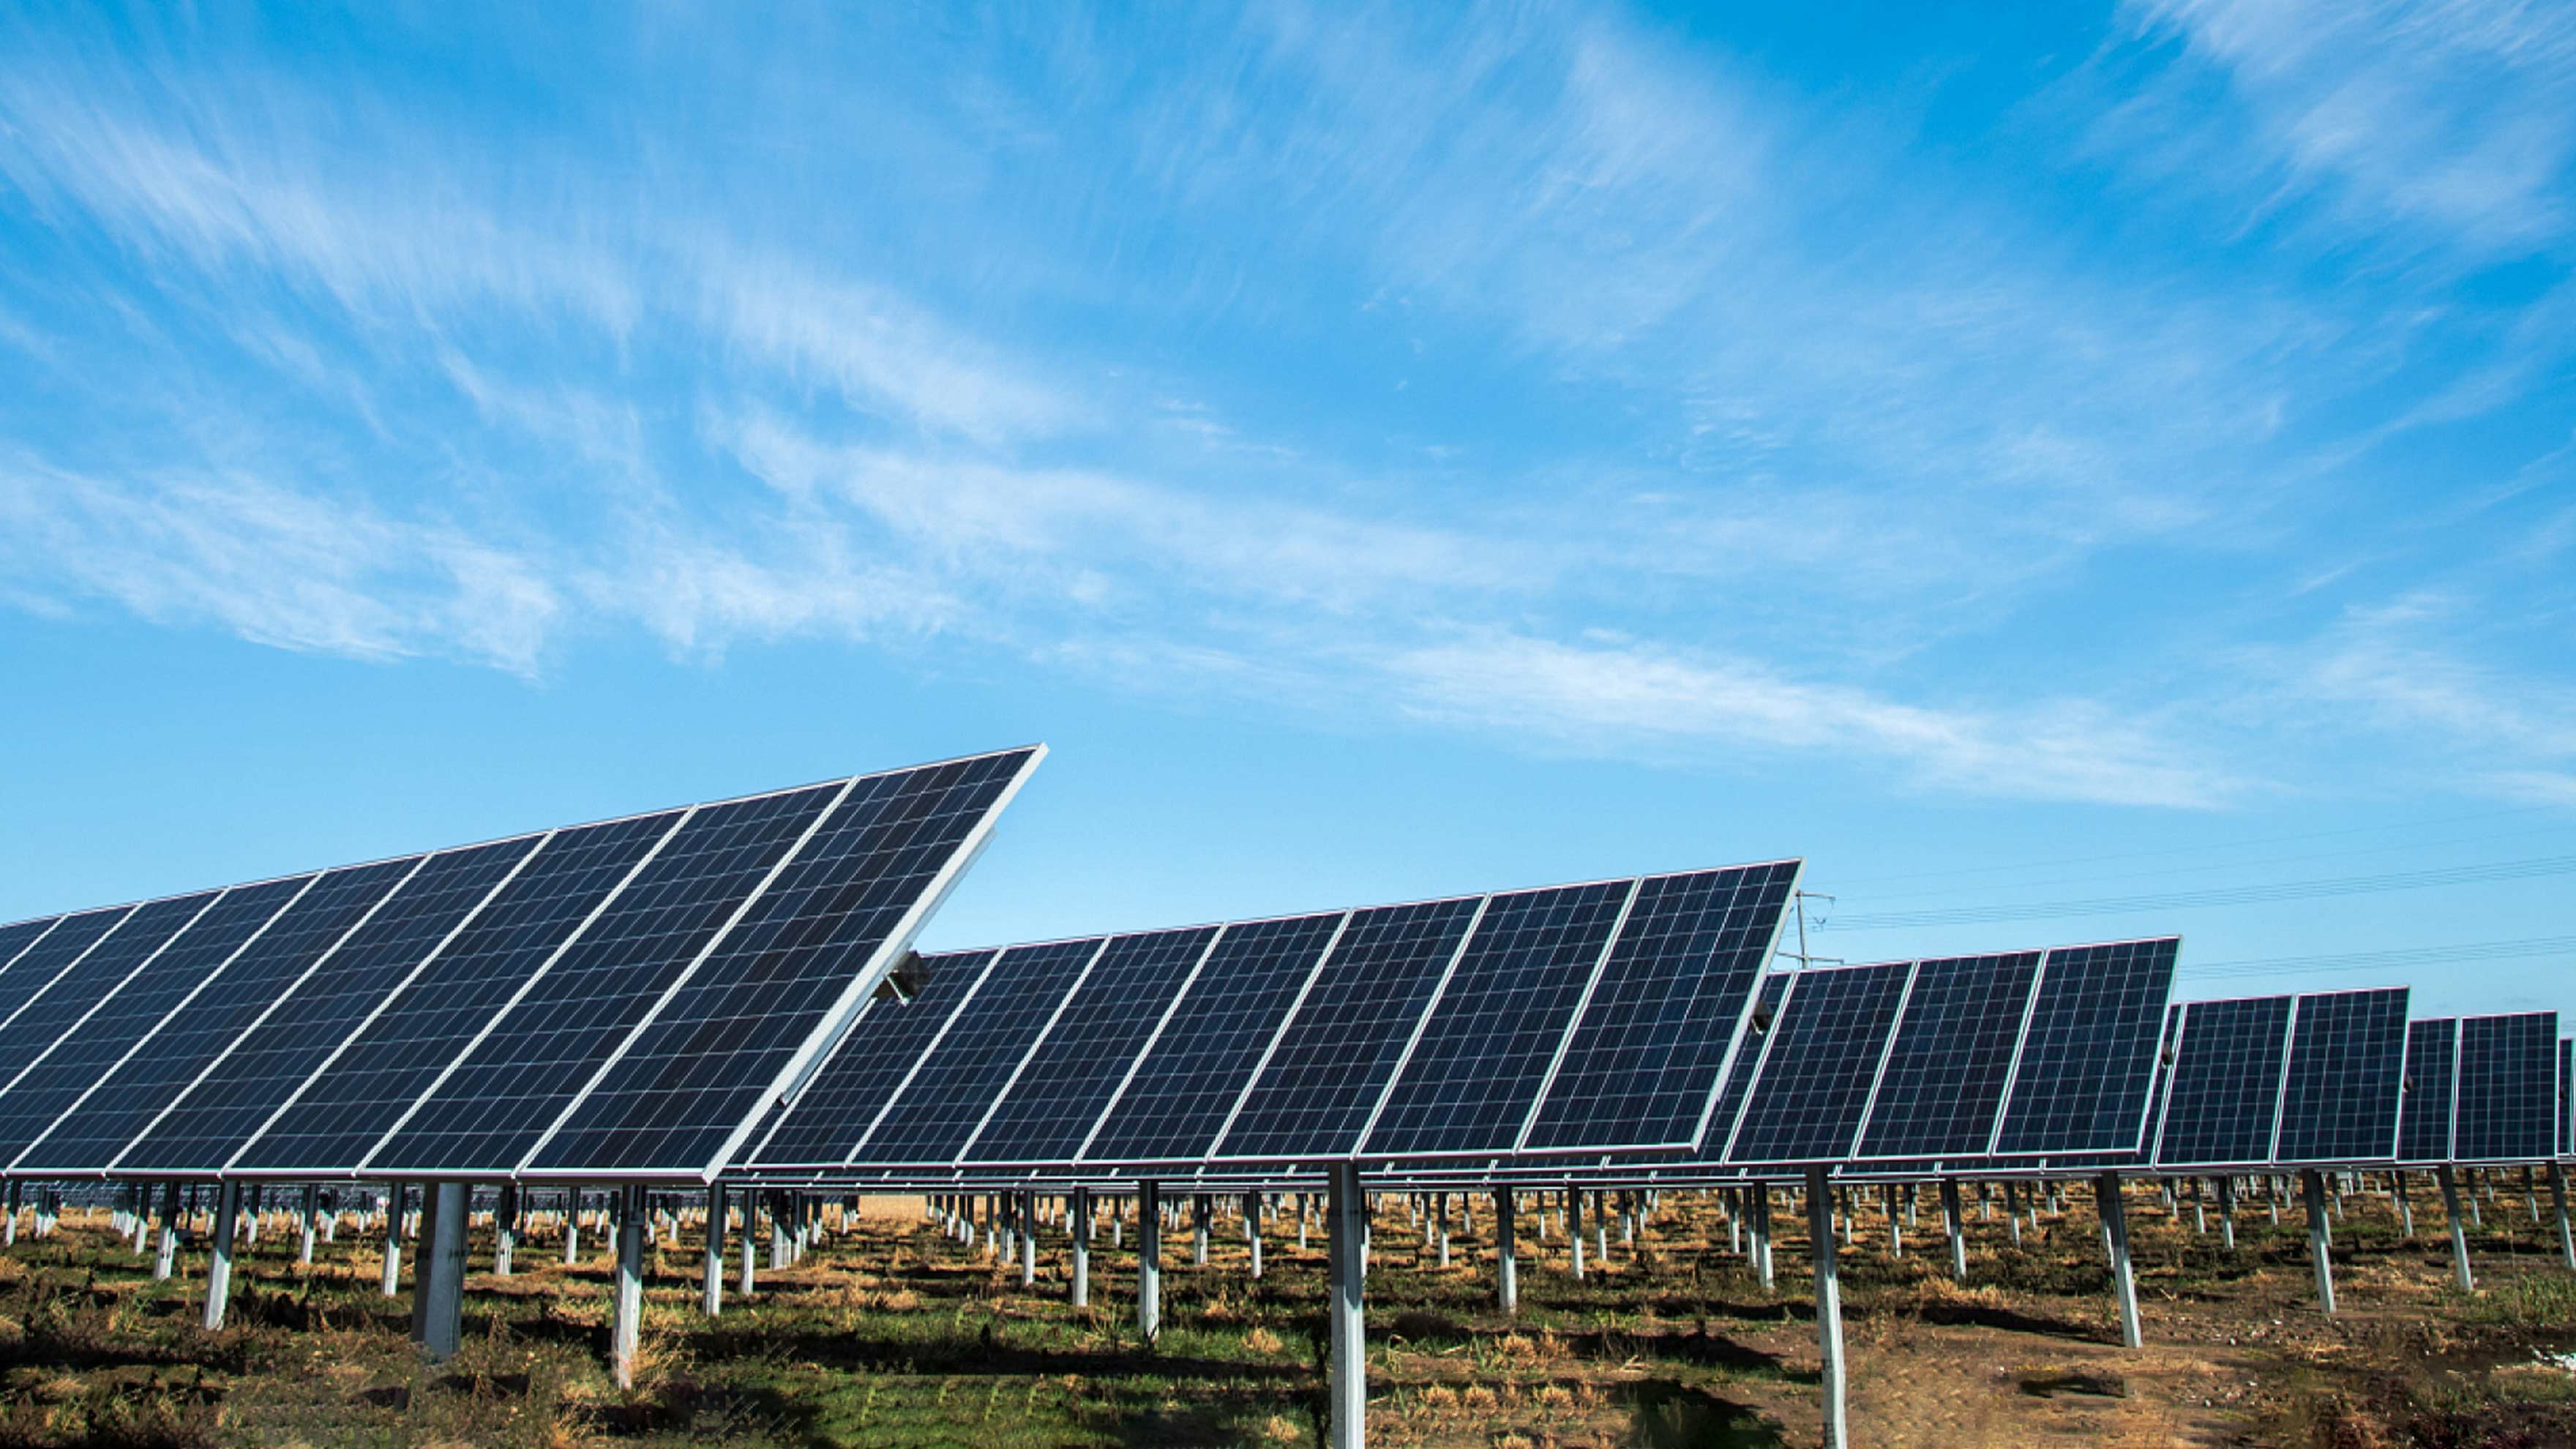 Hanwha has expertise in solar power generation, energy systems solutions and energy retail.